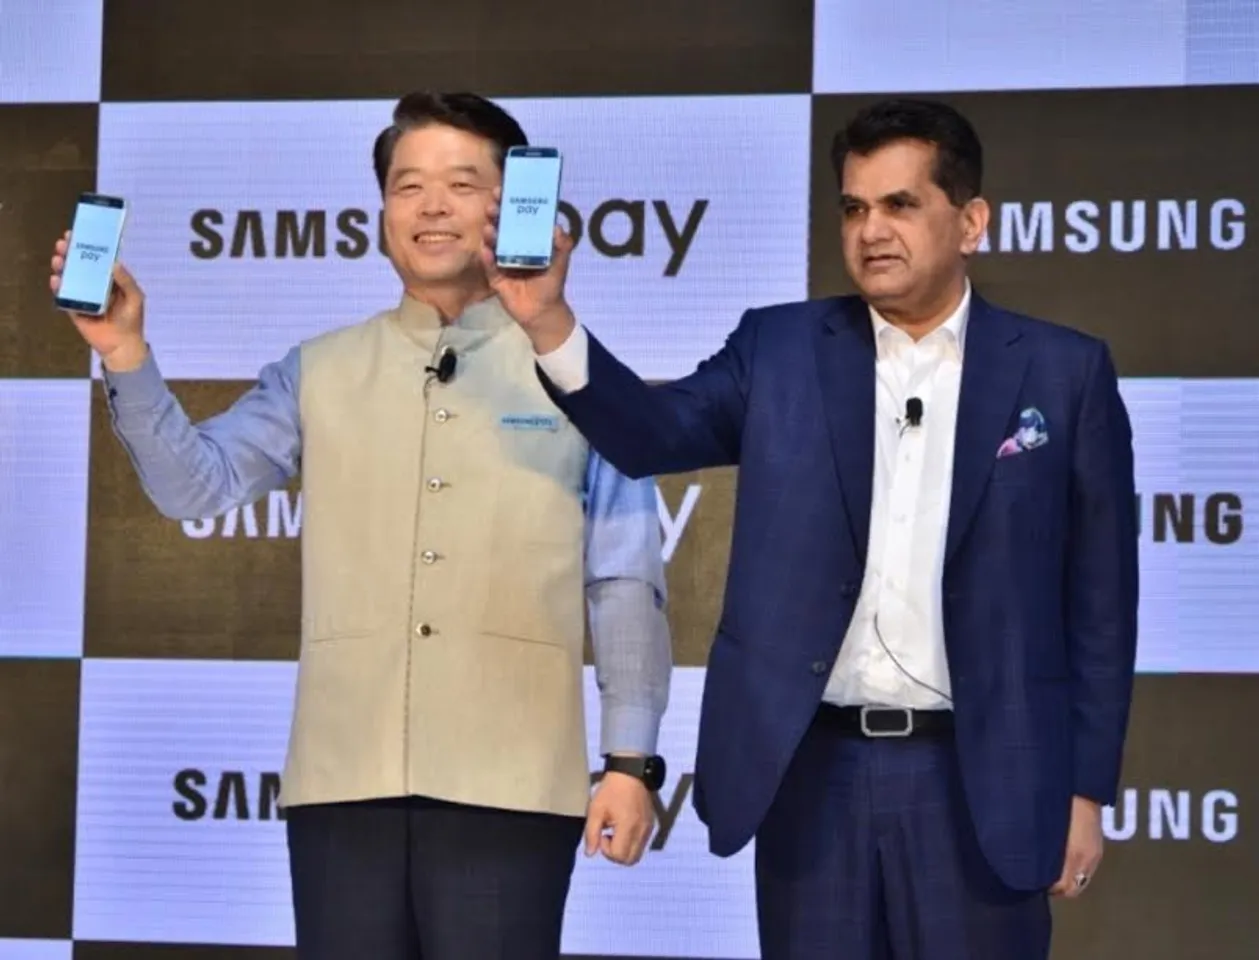 Samsung Pay: An Innovative Mobile Payments System is Now in India